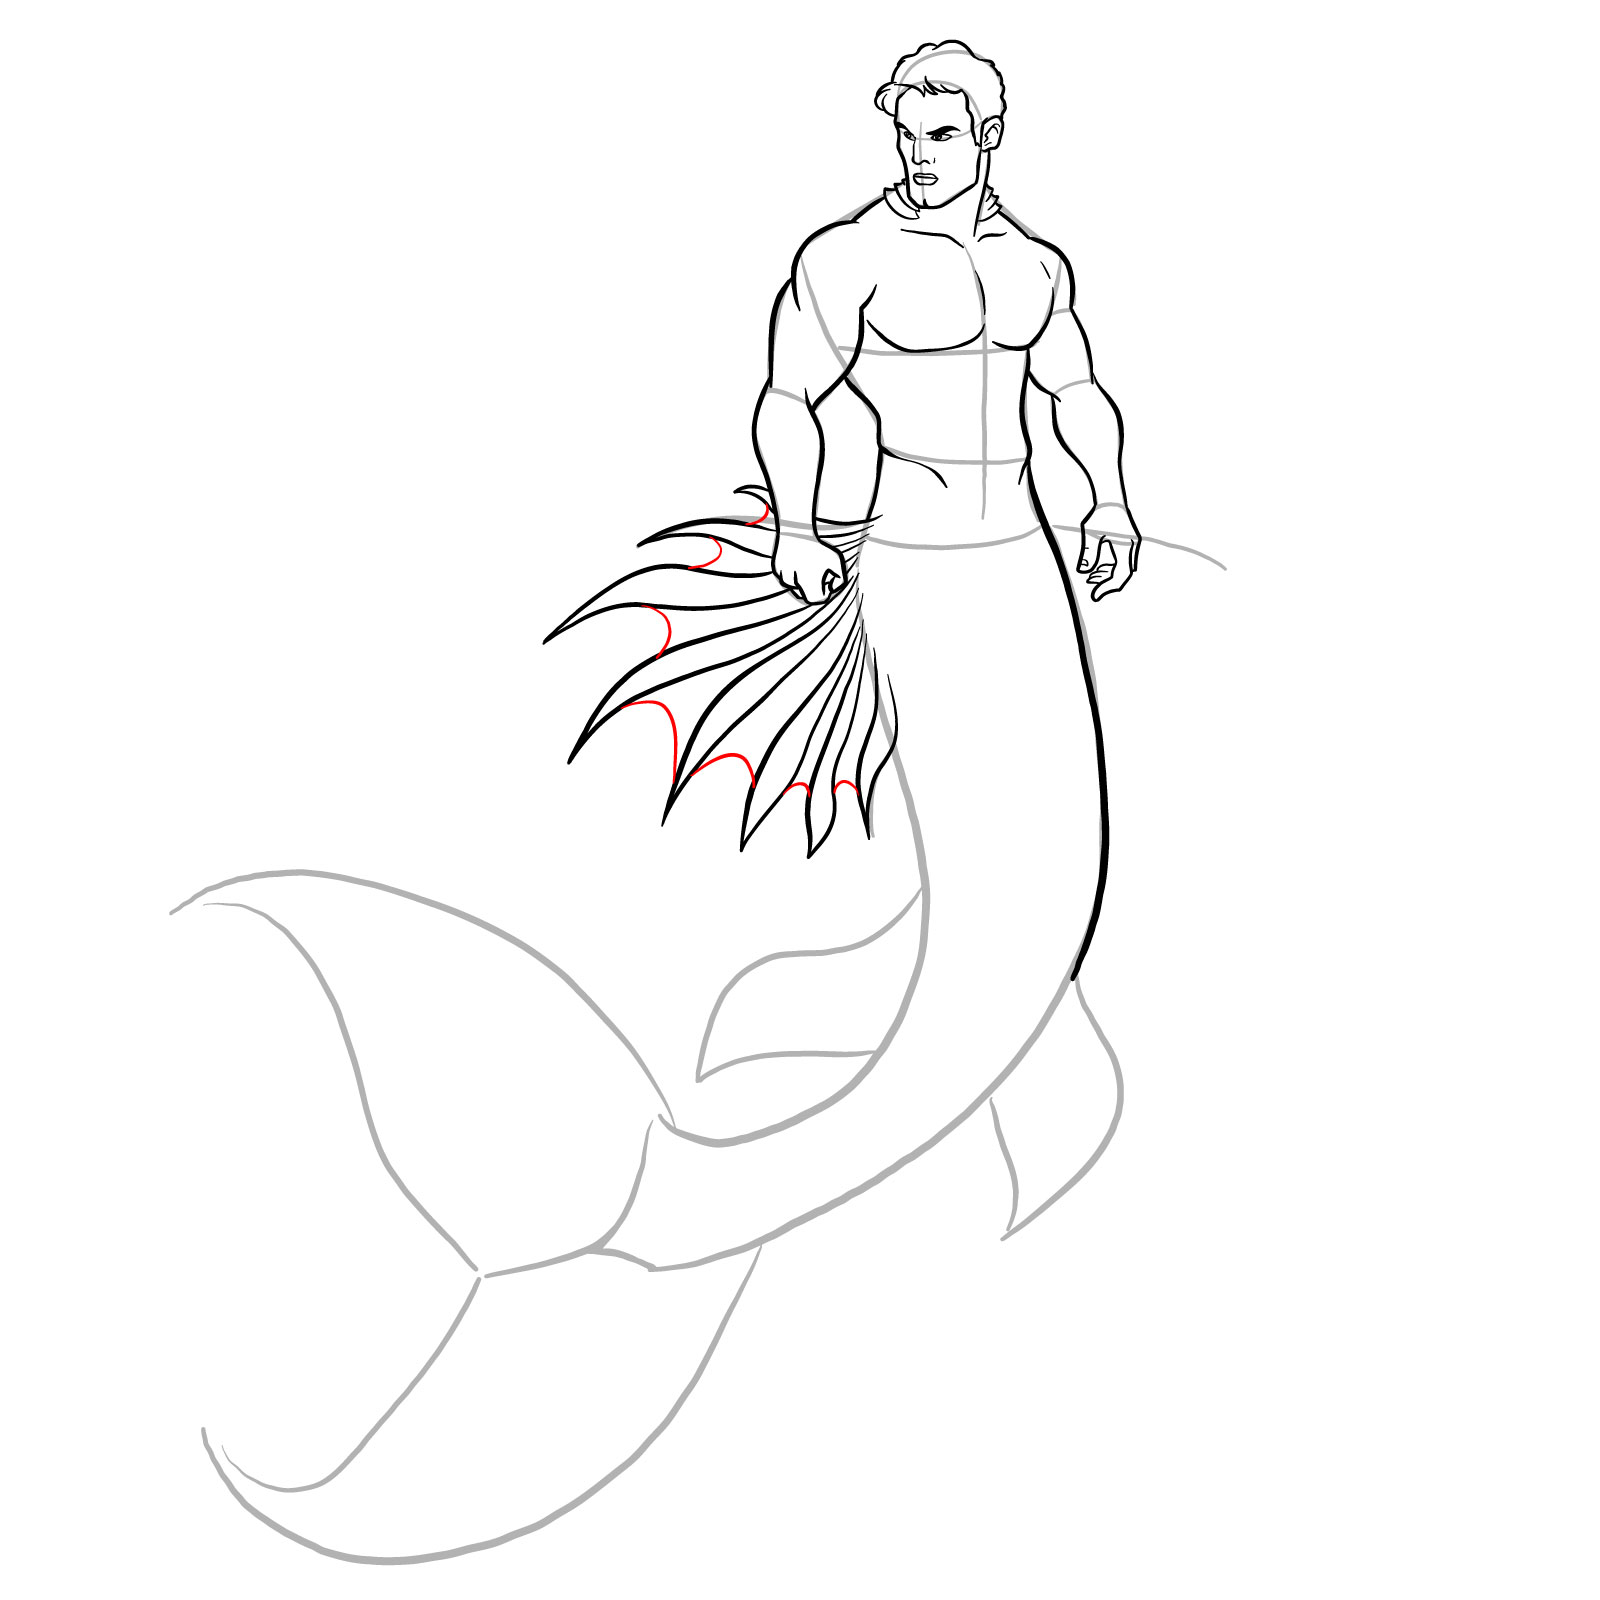 How to draw a Merman - step 27